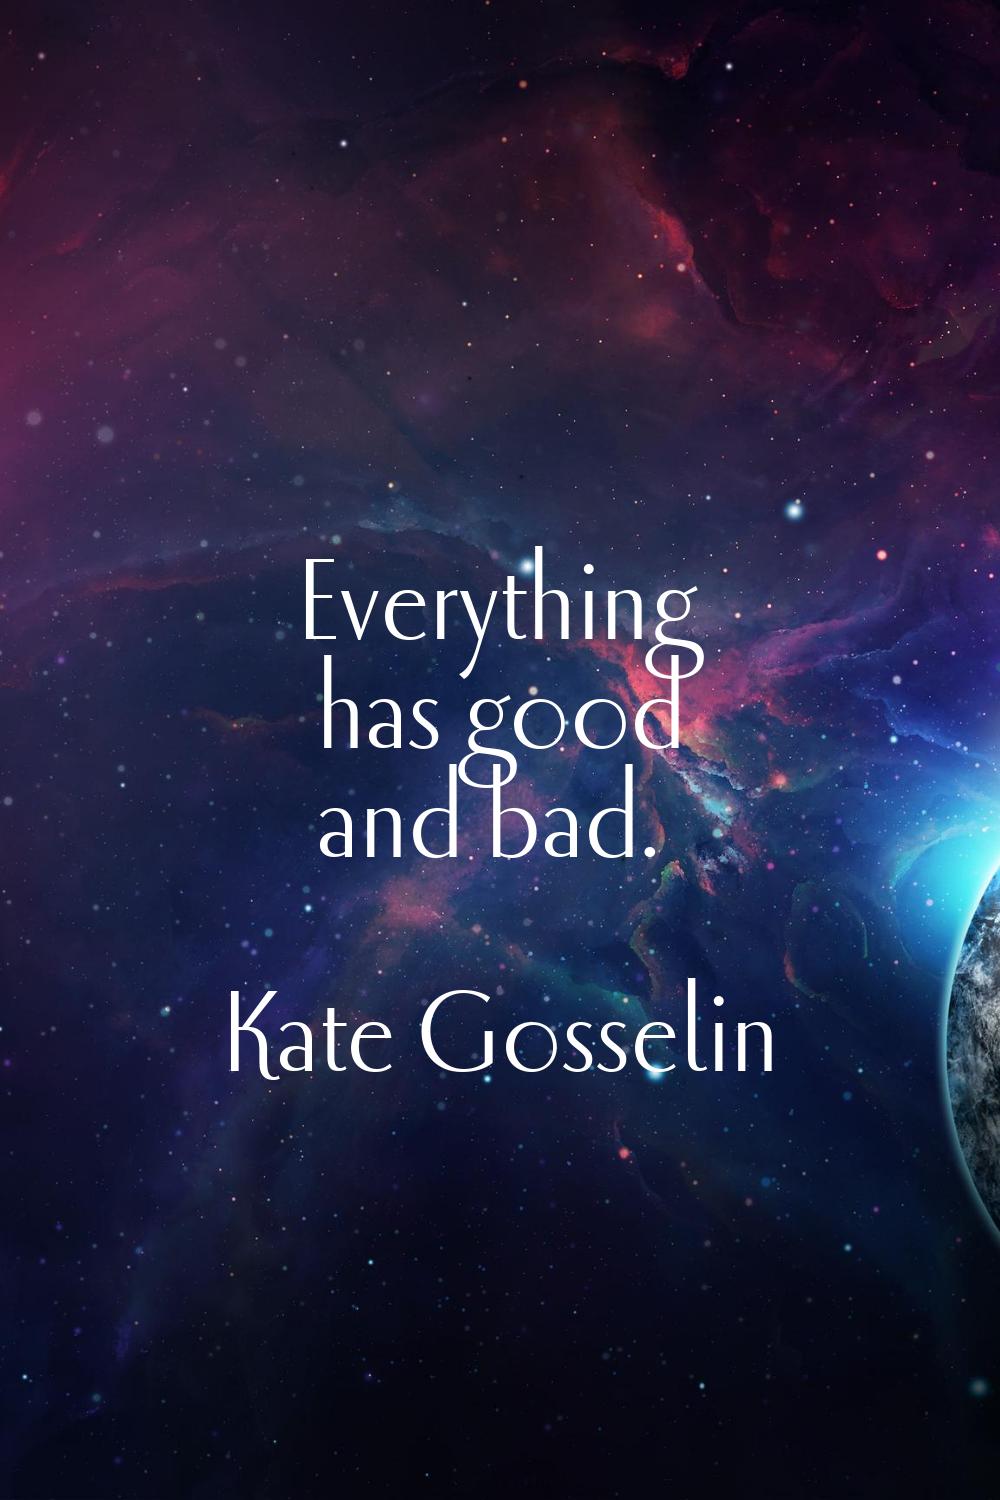 Everything has good and bad.